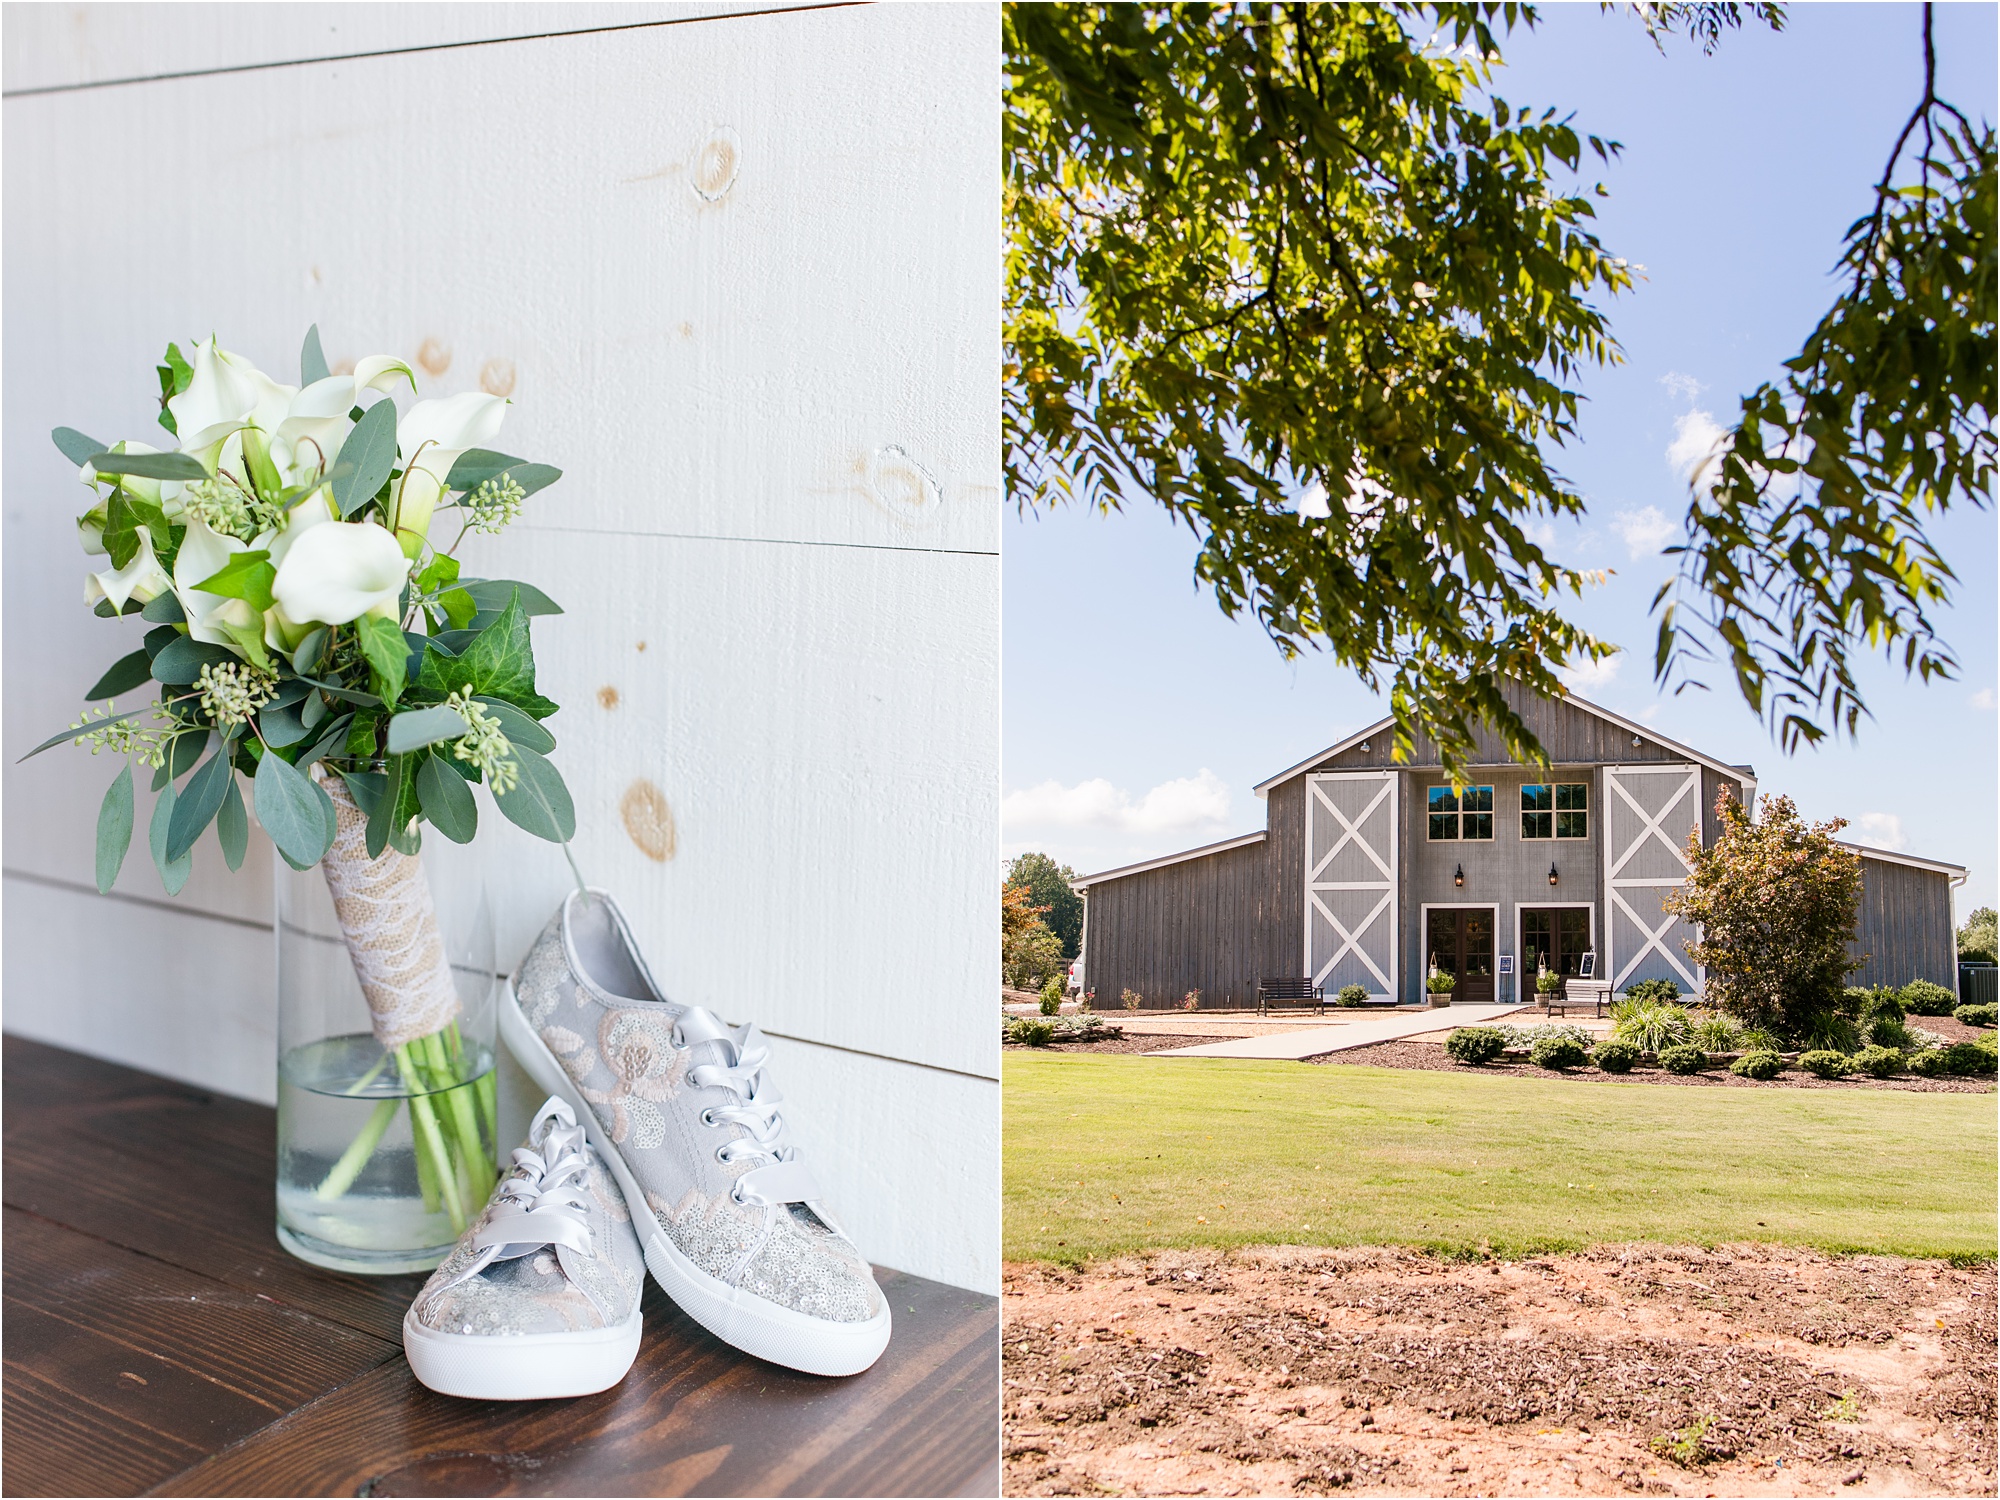 grant hill farms athens georgia wedding photographer sequin shoes and bouquet